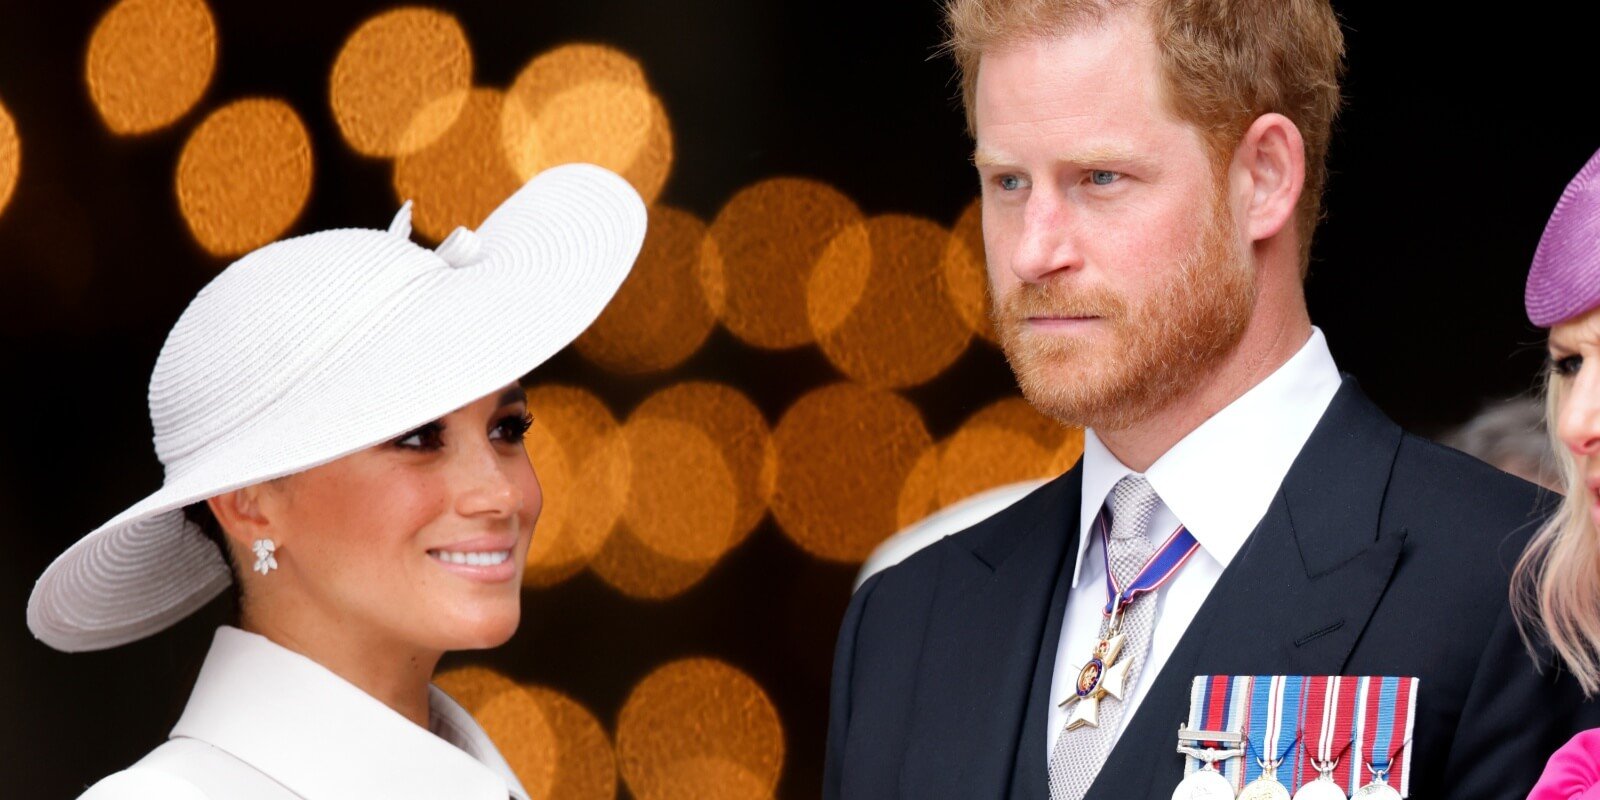 Meghan Markle and Prince Harry pose at a the platinum jubilee of Queen Elizabeth in 2022.